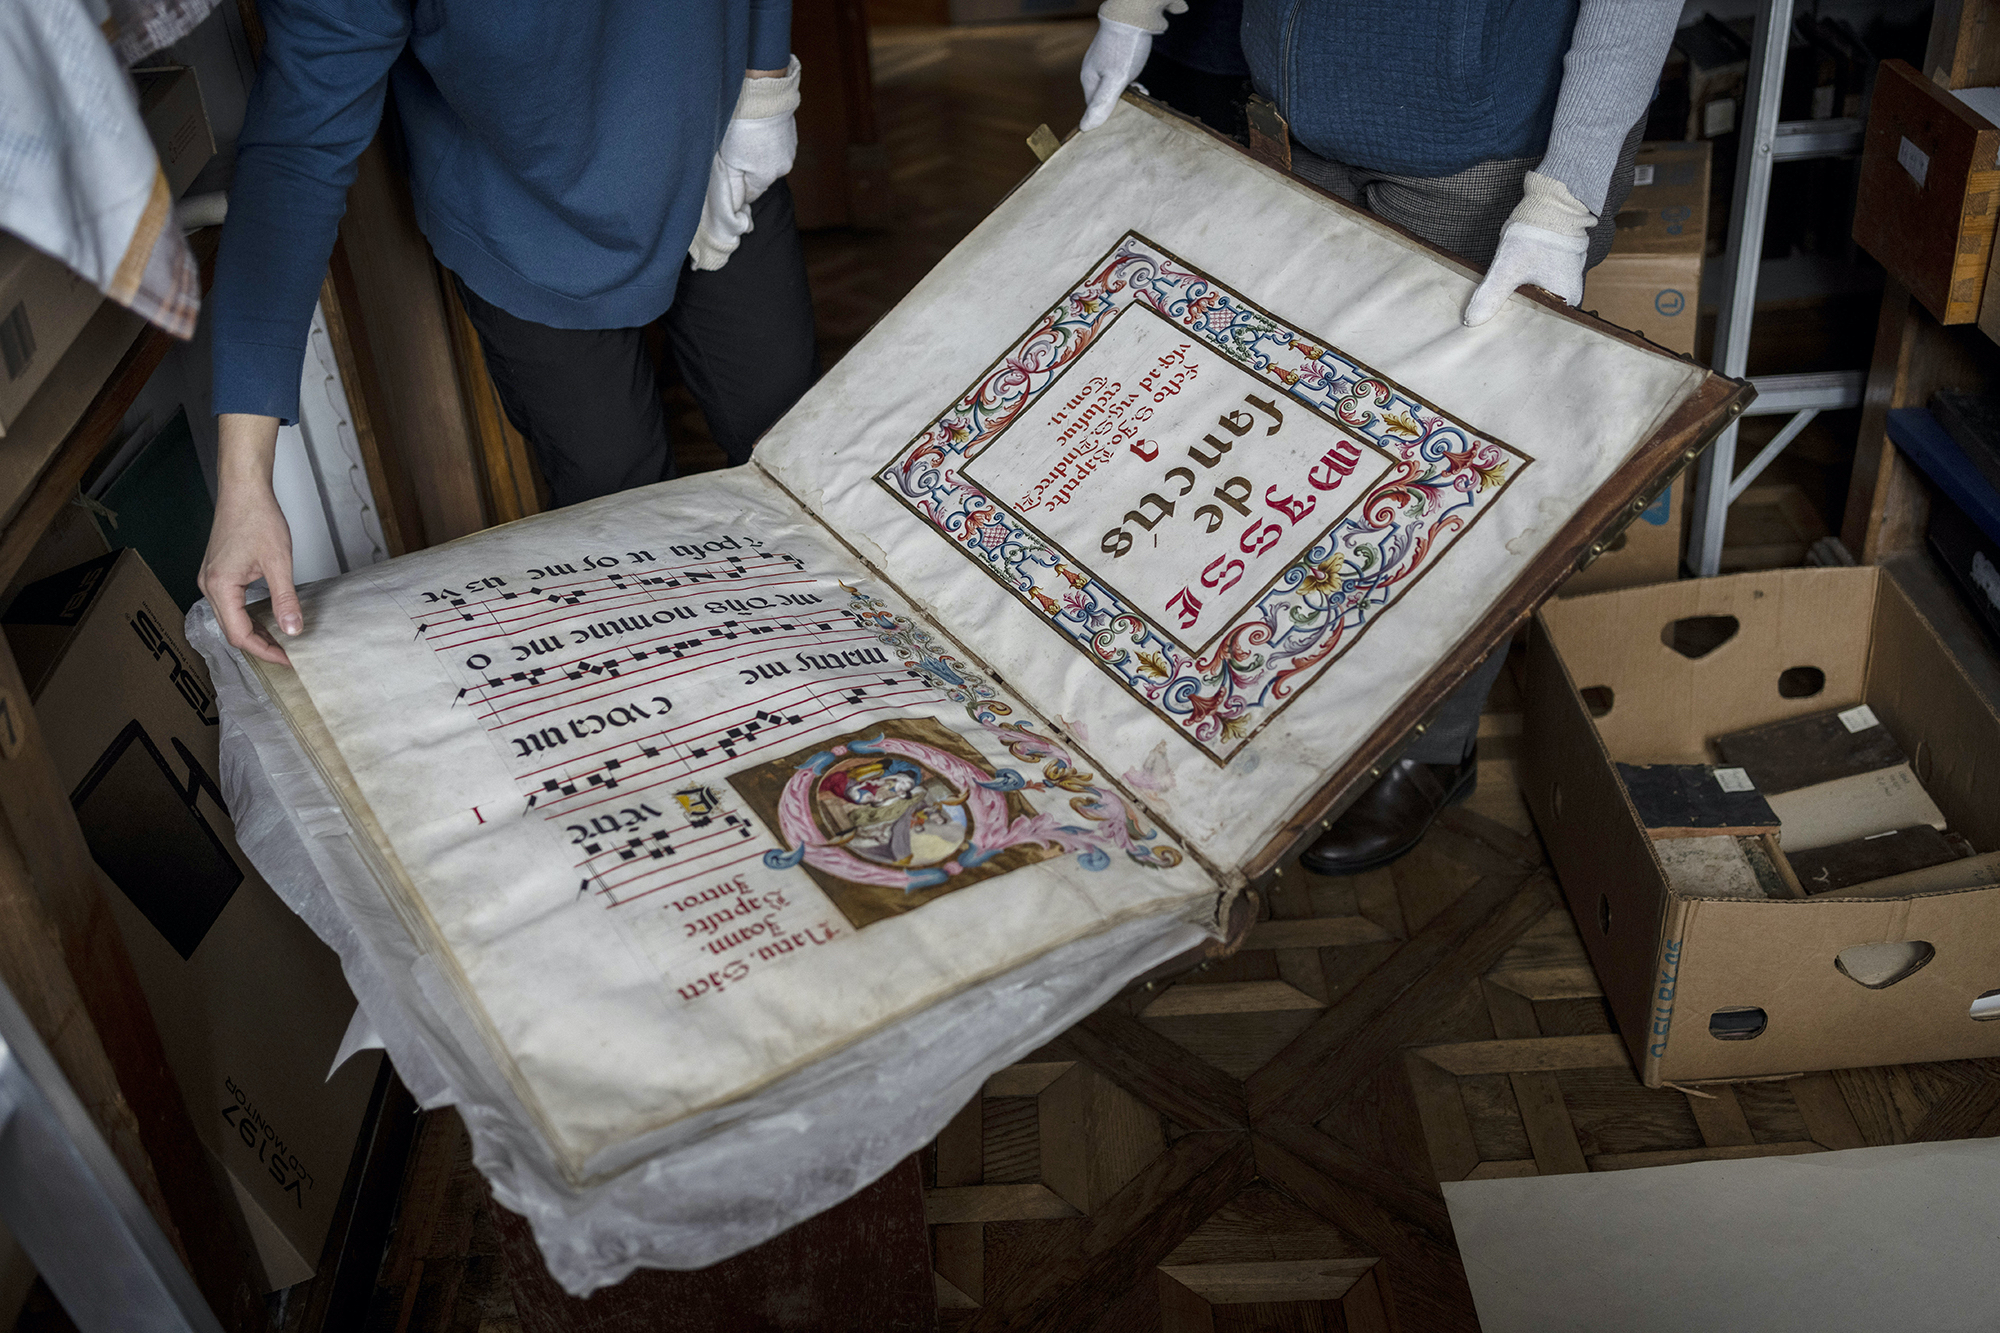 An old and large book upside down on a table, being held by two sets of hands, one gloved, the other not. There are boxes and other materials all around.